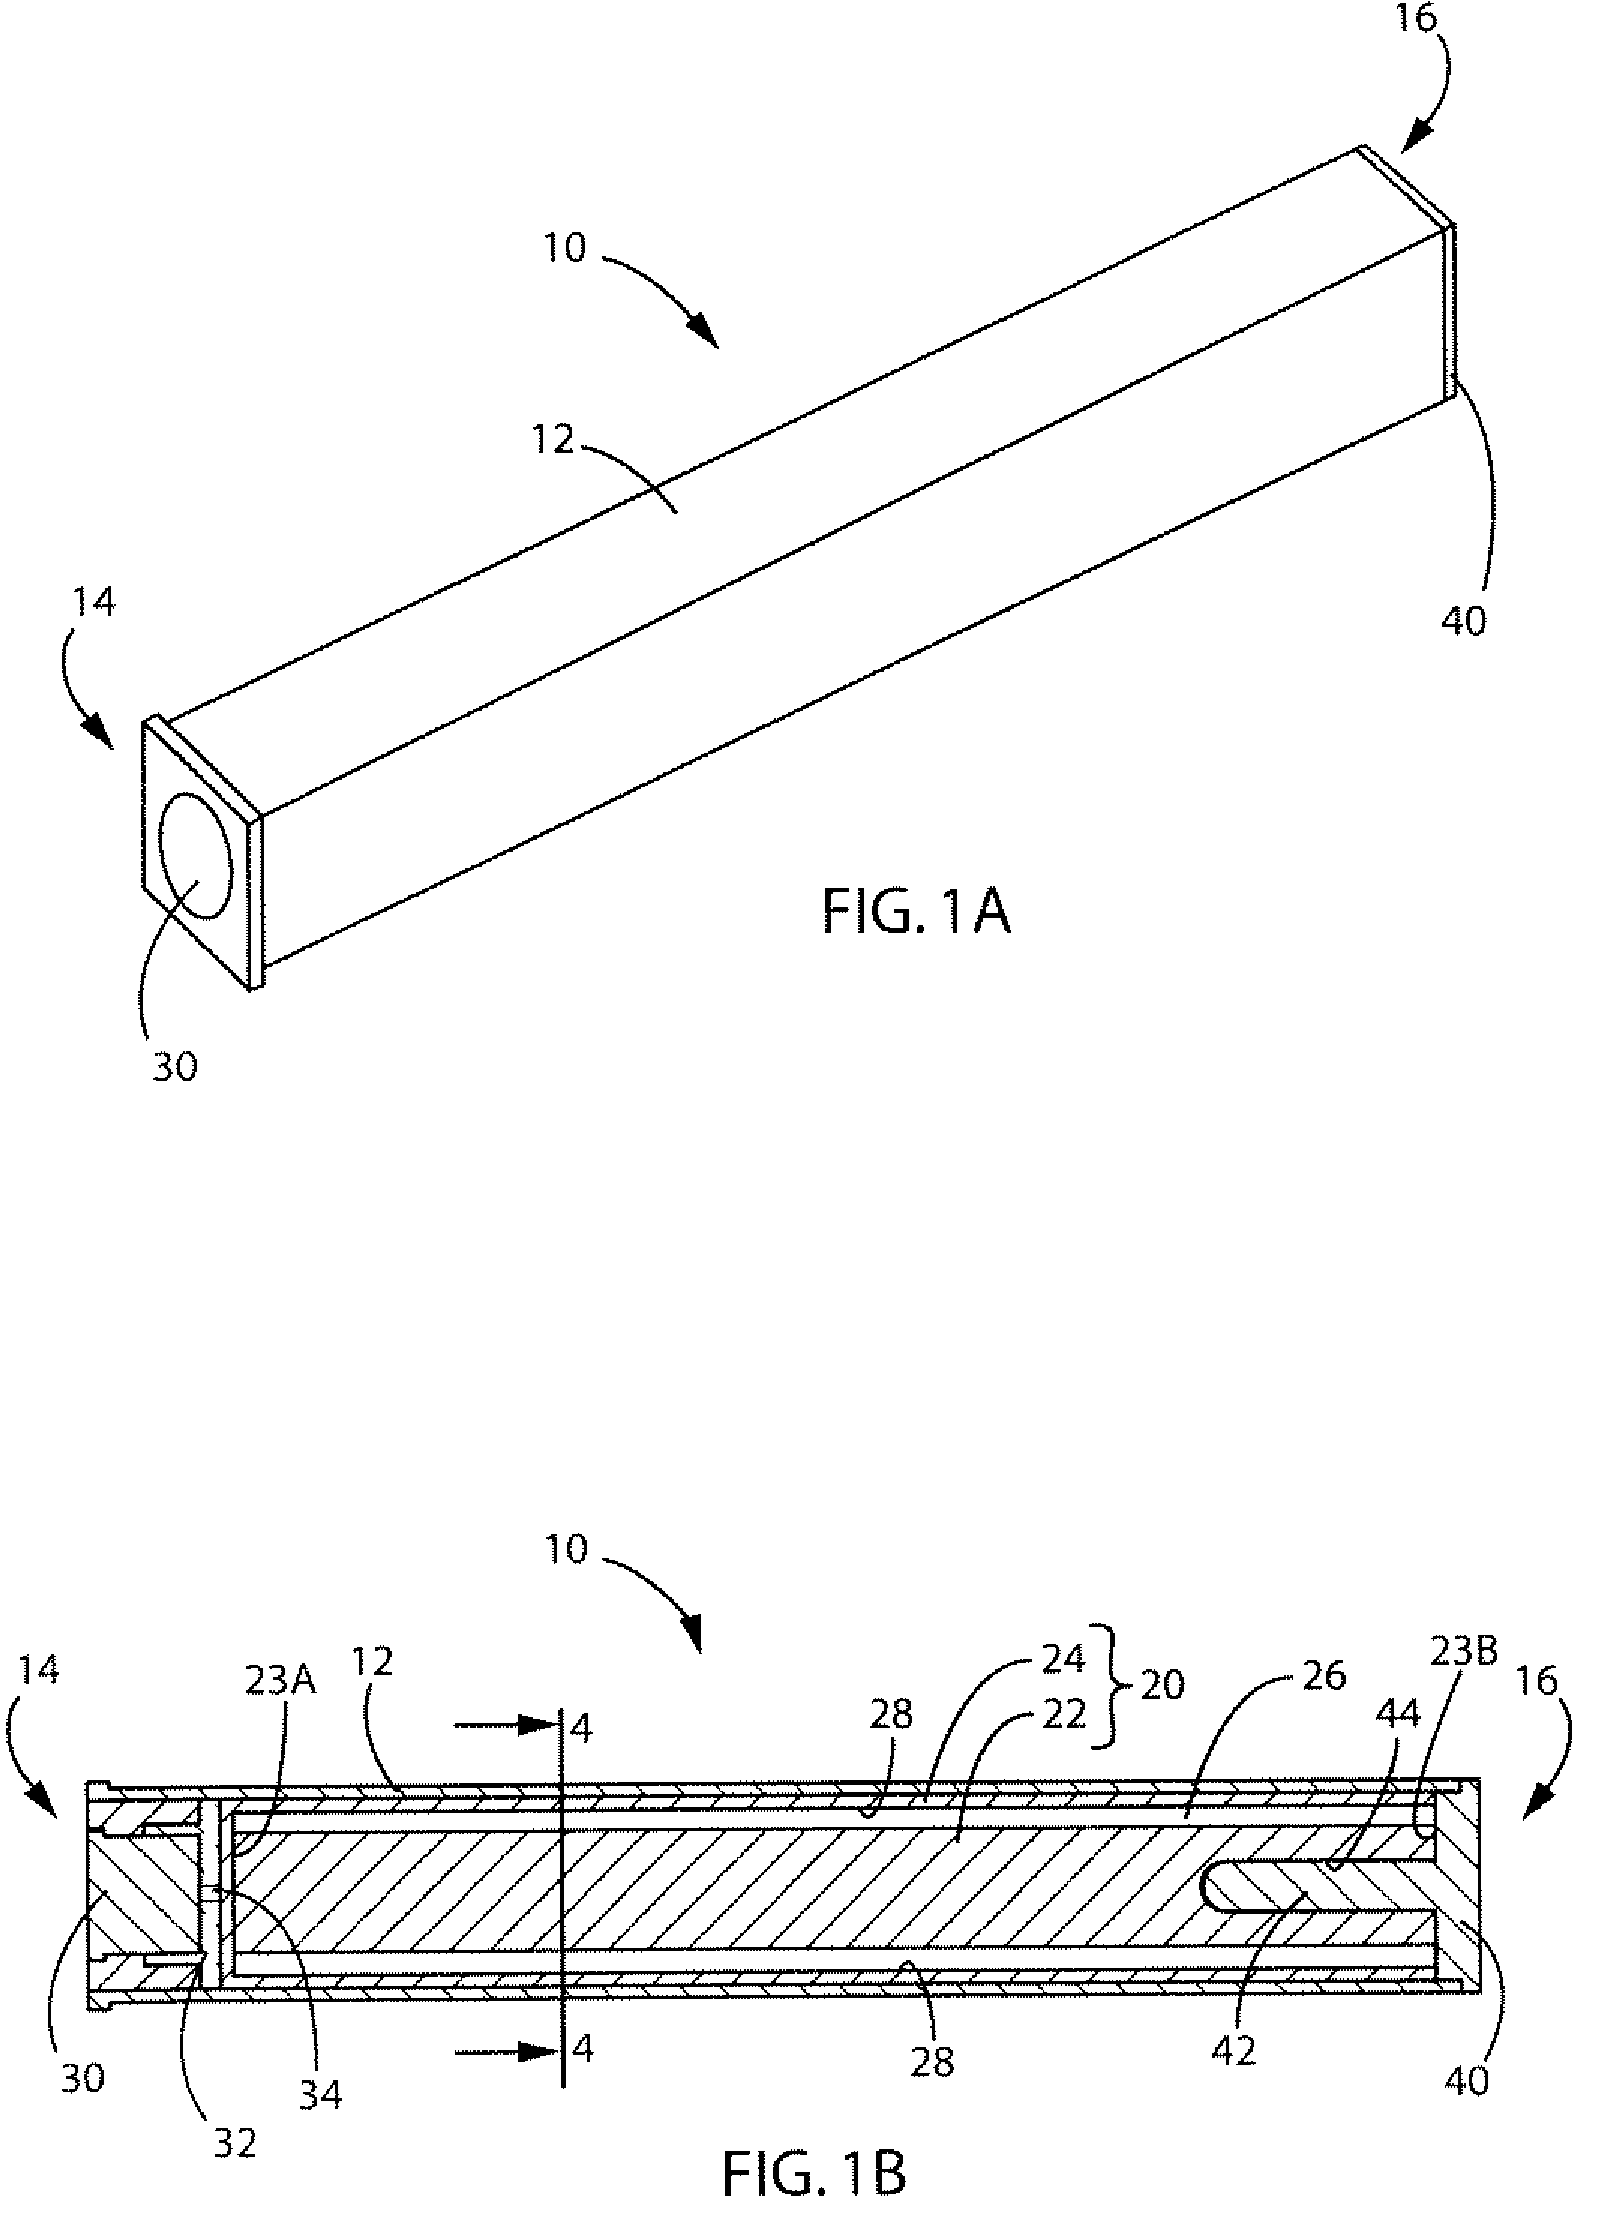 Flares including reactive foil for igniting a combustible grain thereof and methods of fabricating and igniting such flares